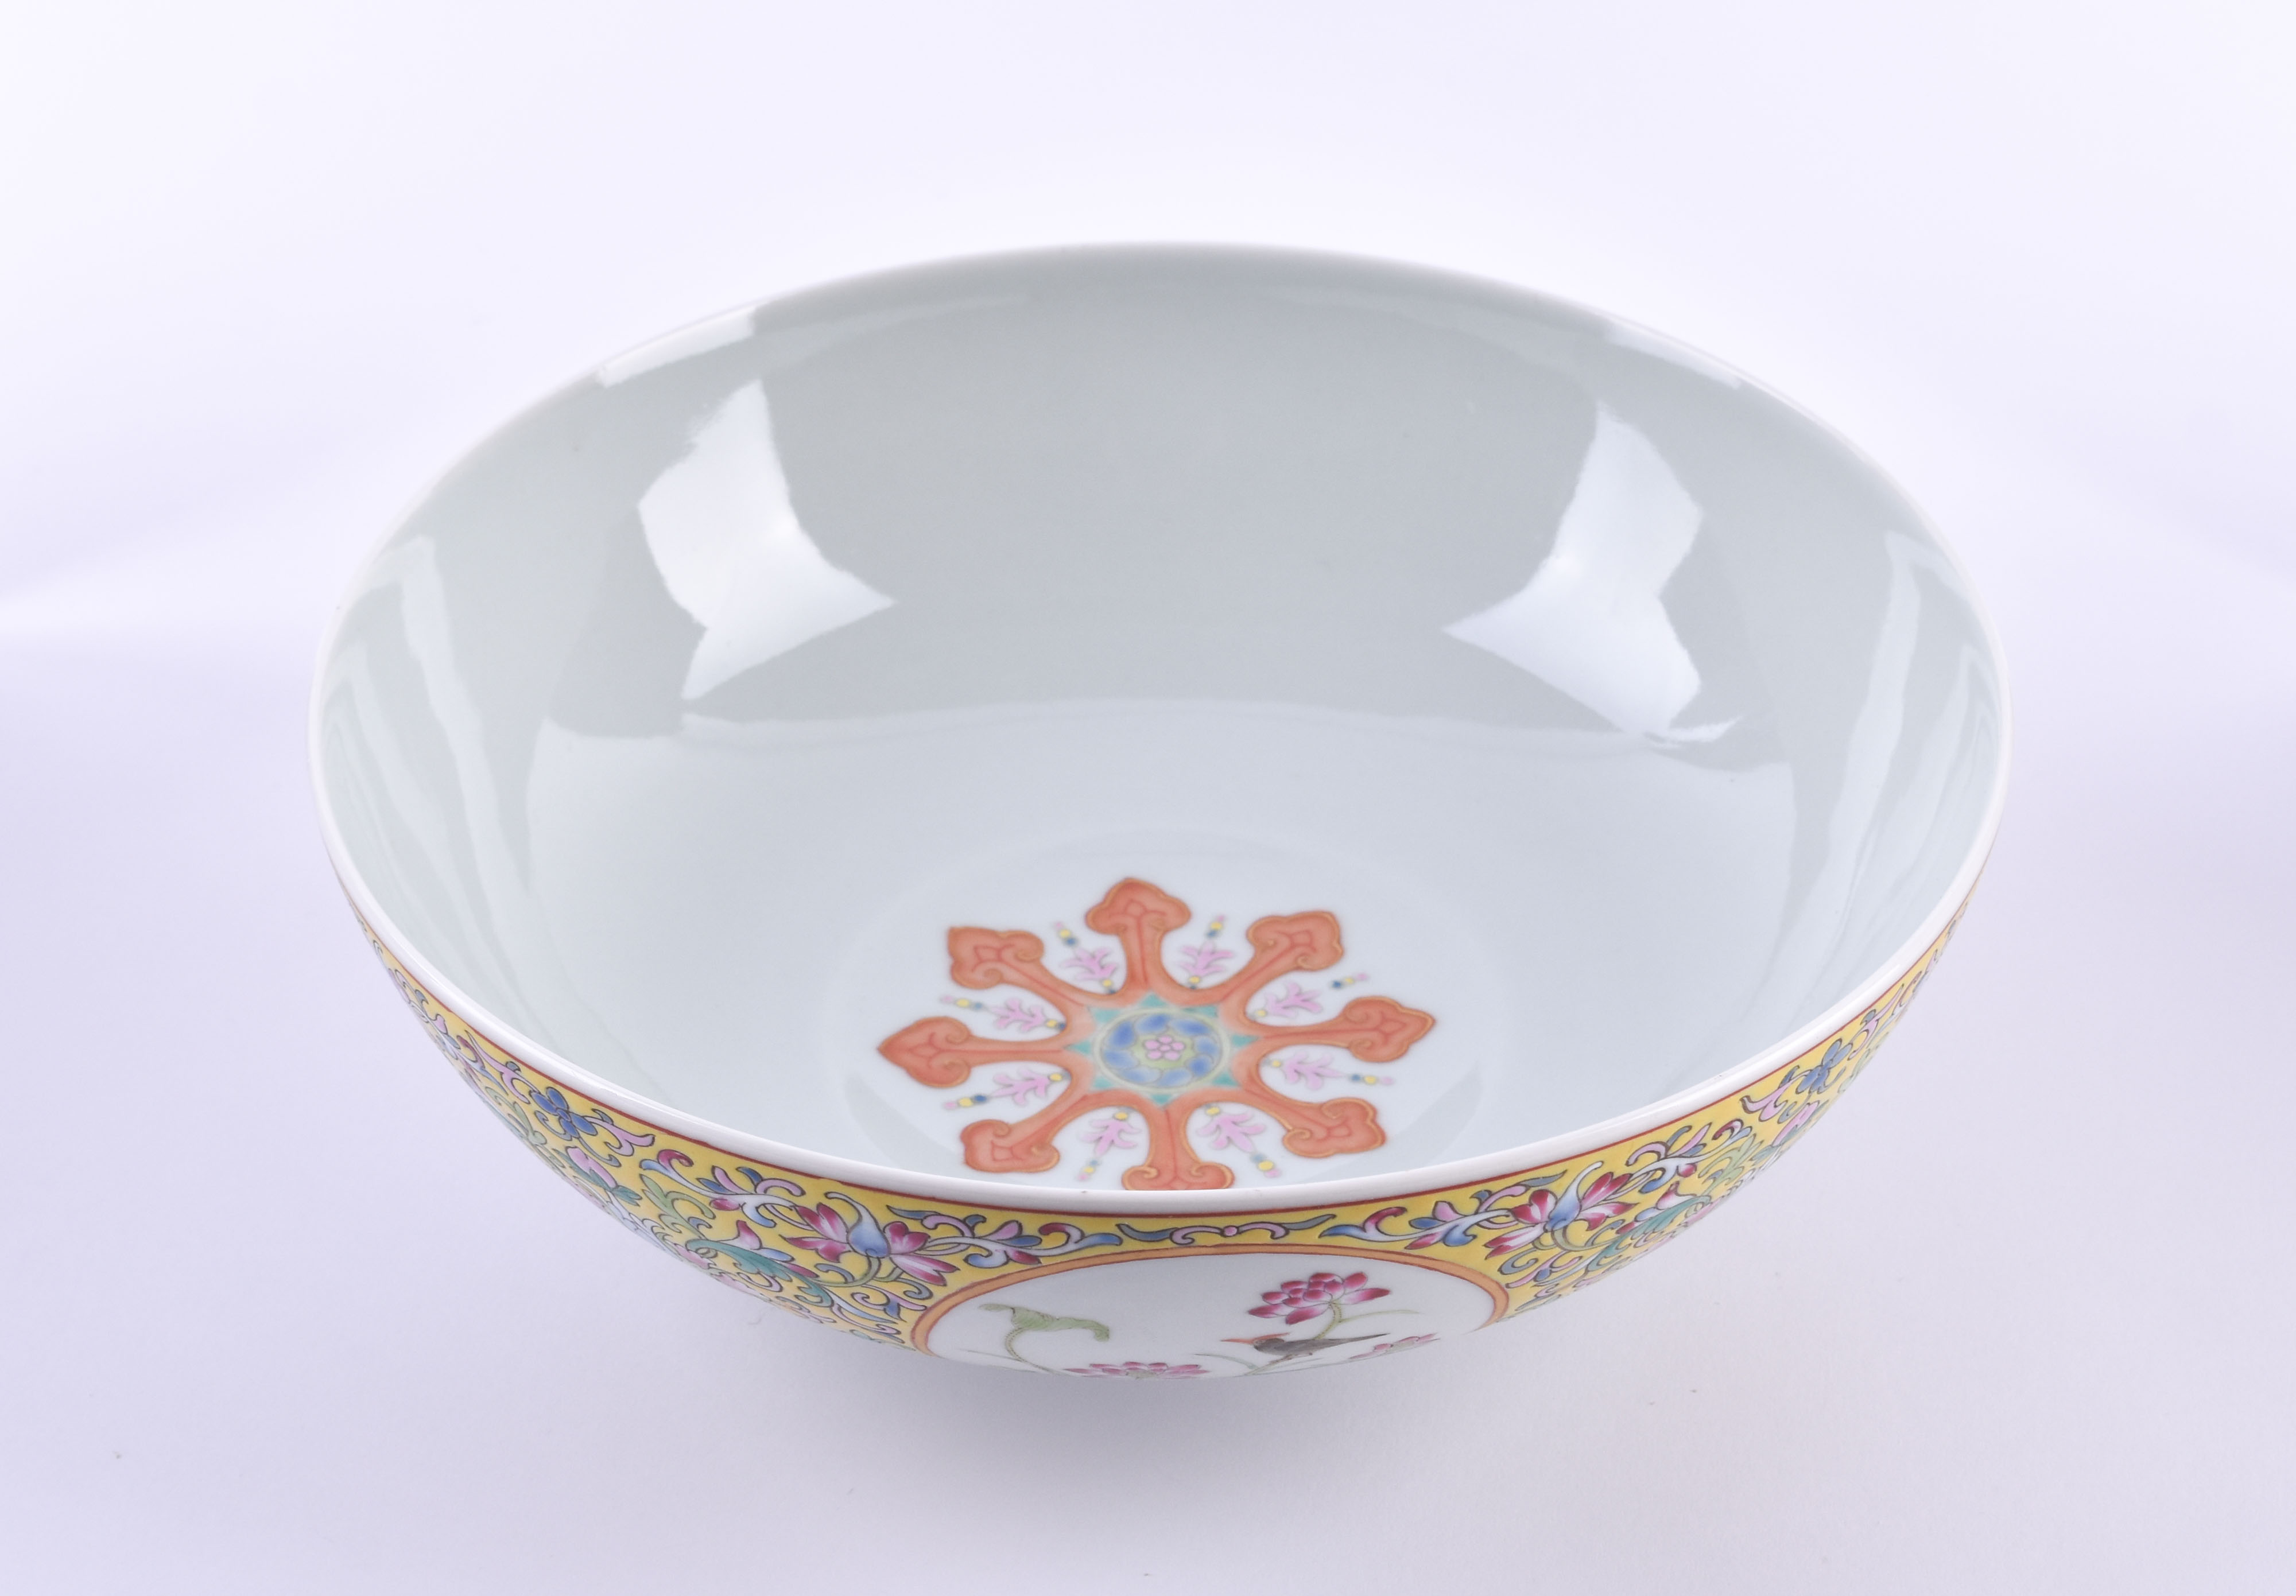  Famille rose bowl late Qing dynasty - Image 4 of 12